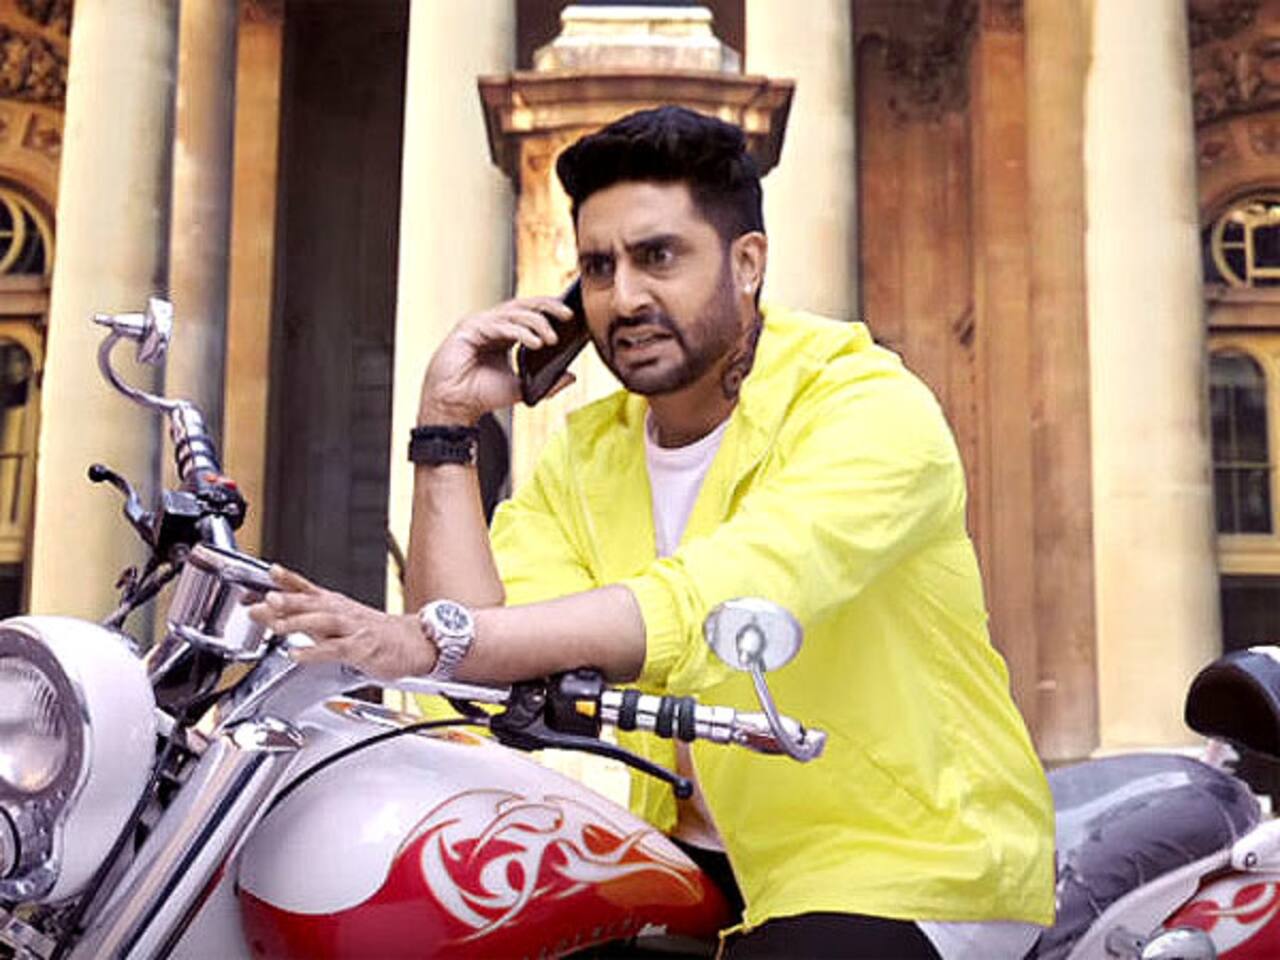 Housefull 3, Happy New Year, Bol Bachchan - 3 films that prove Abhishek  Bachchan should stick to comedy! - Bollywood News & Gossip, Movie Reviews,  Trailers & Videos at 